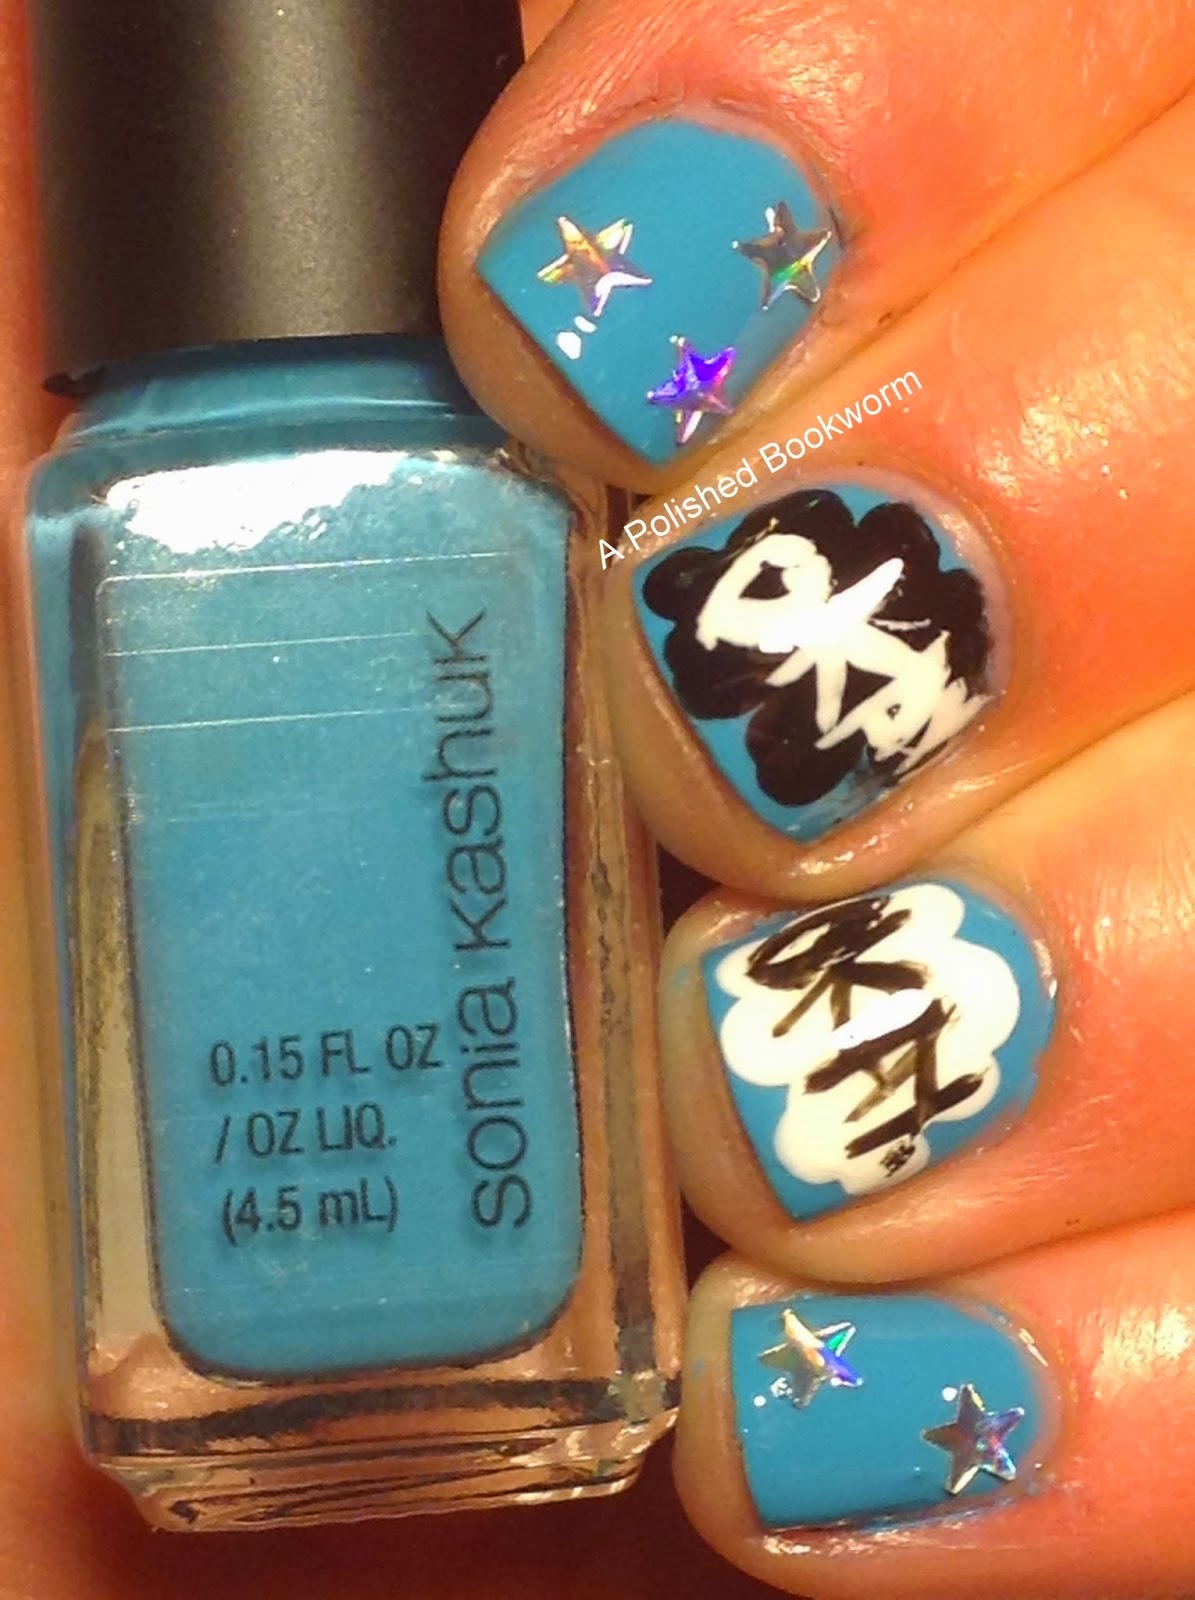 http://apolishedbookworm.blogspot.com/2014/02/nailing-book-fault-in-our-stars-nail-art.html